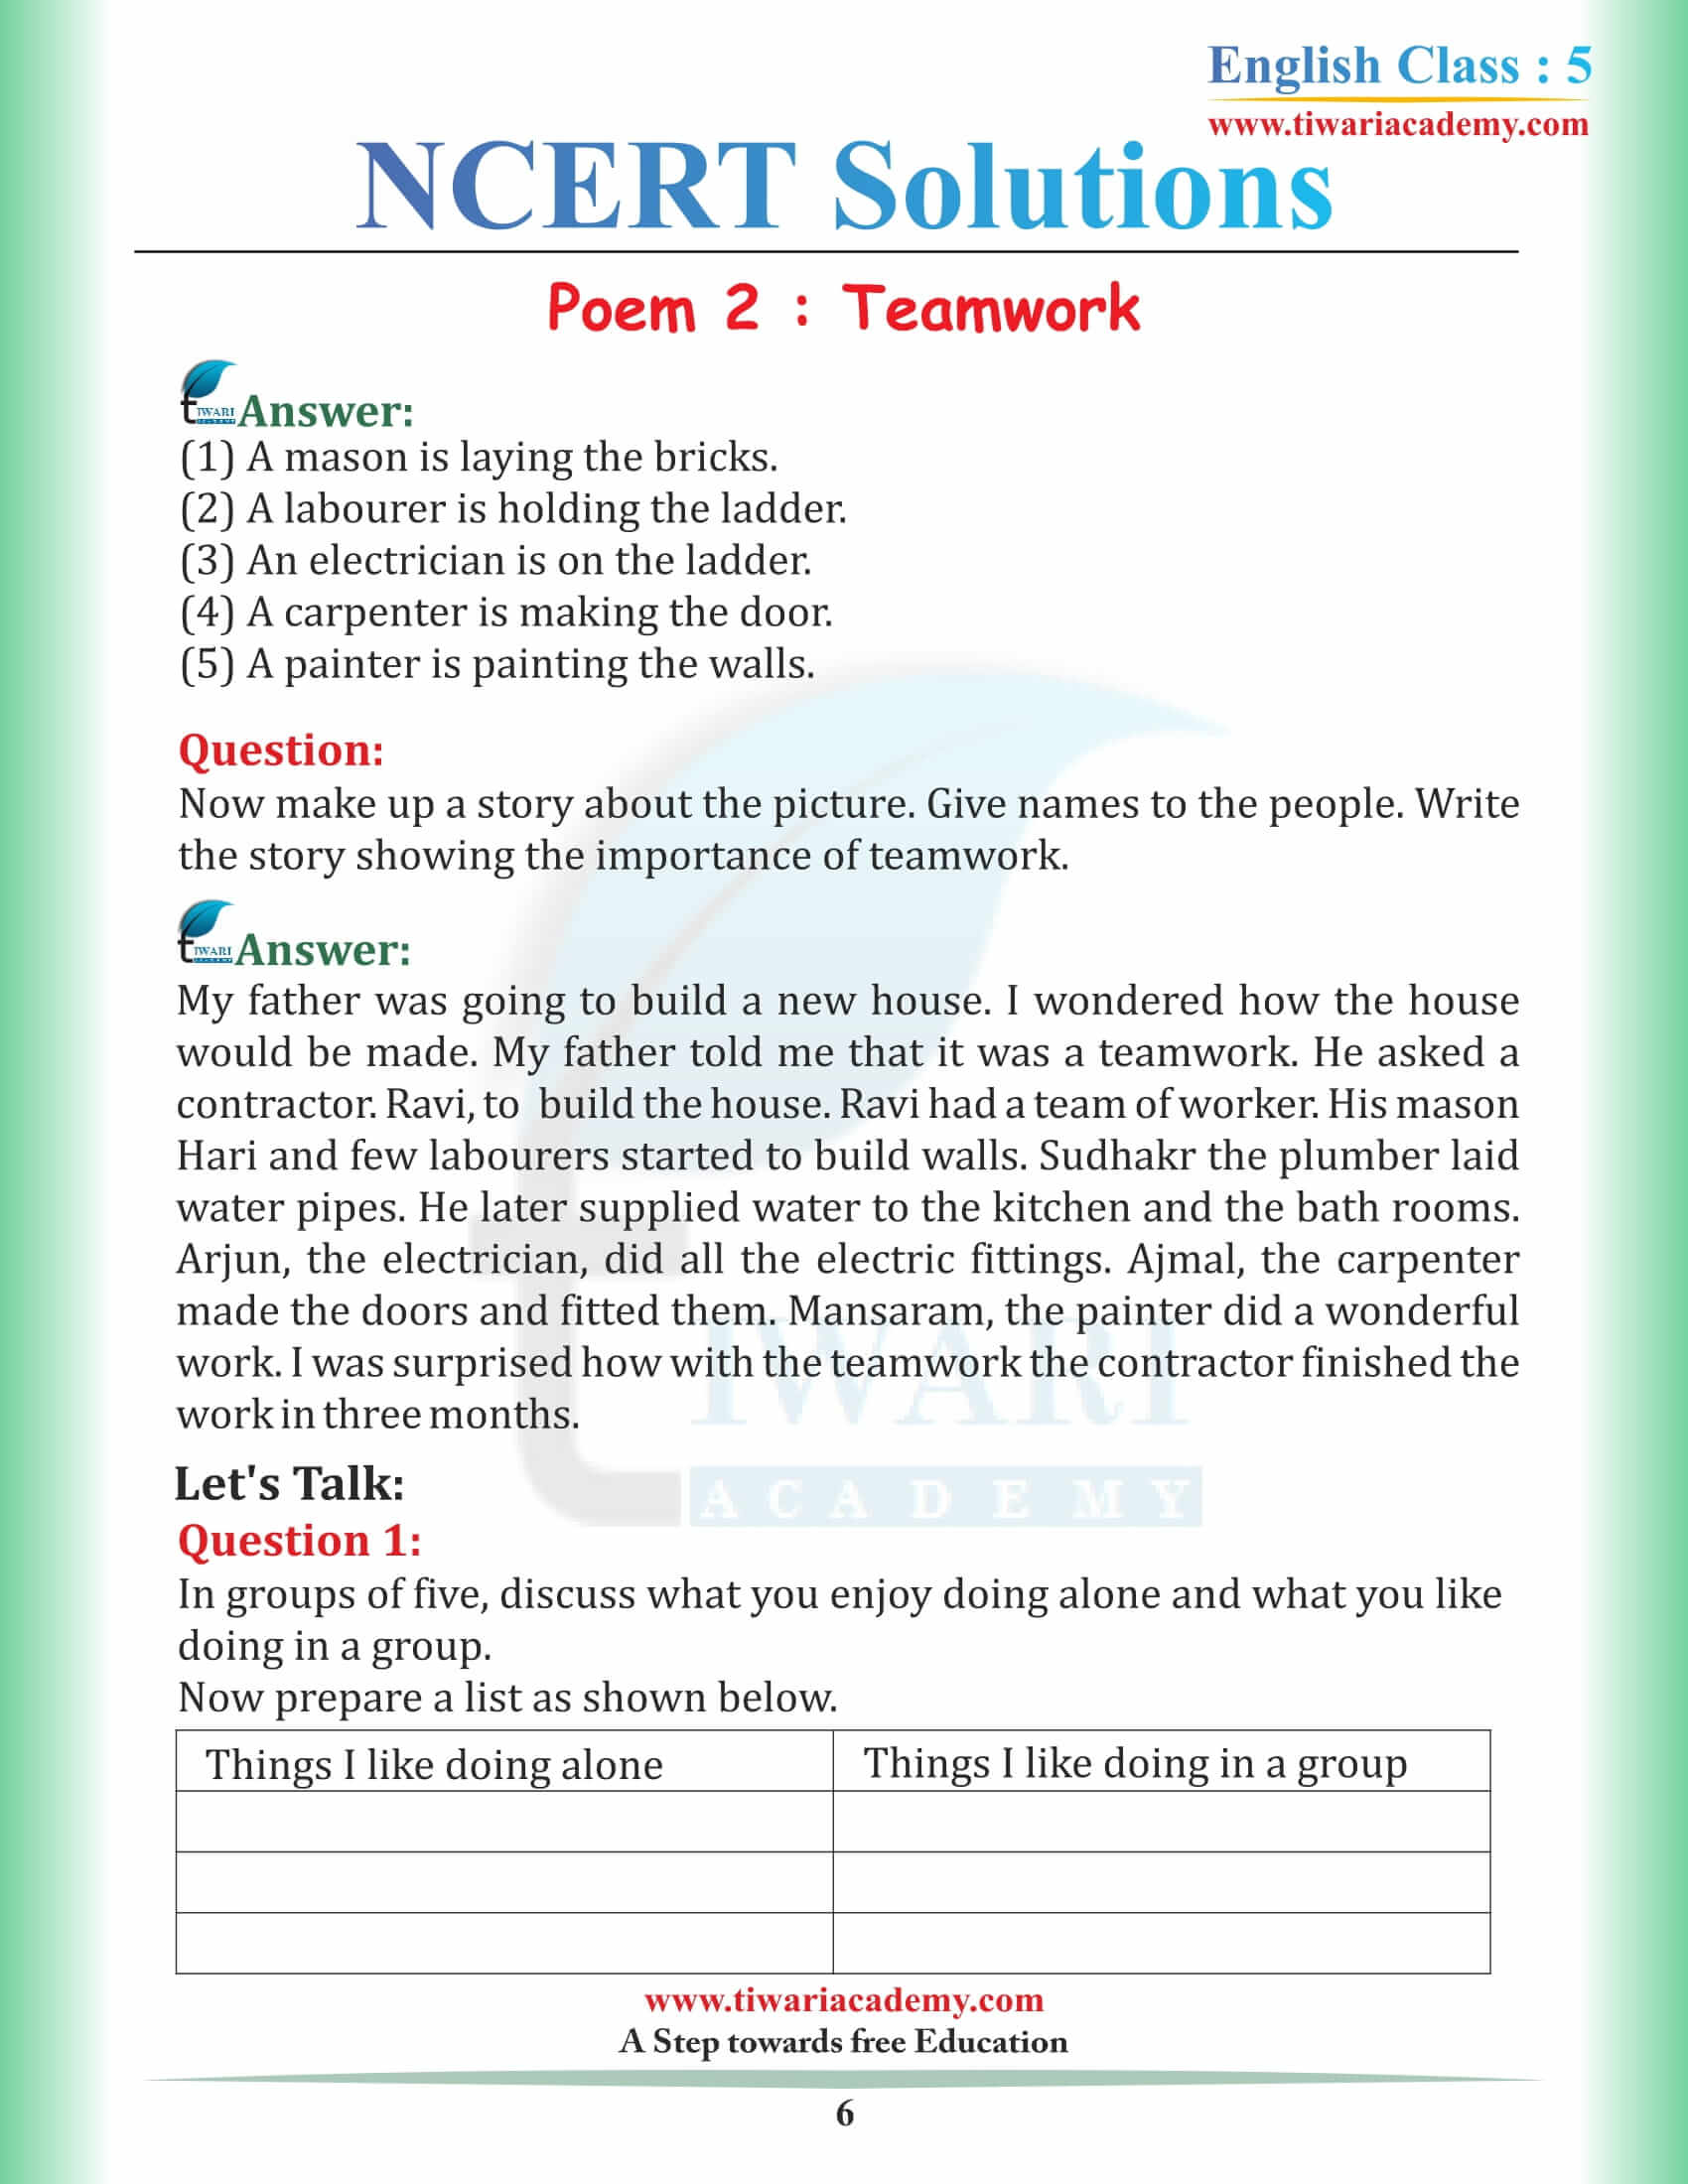 NCERT Solutions for Class 5 English Chapter 2 in Hindi Medium